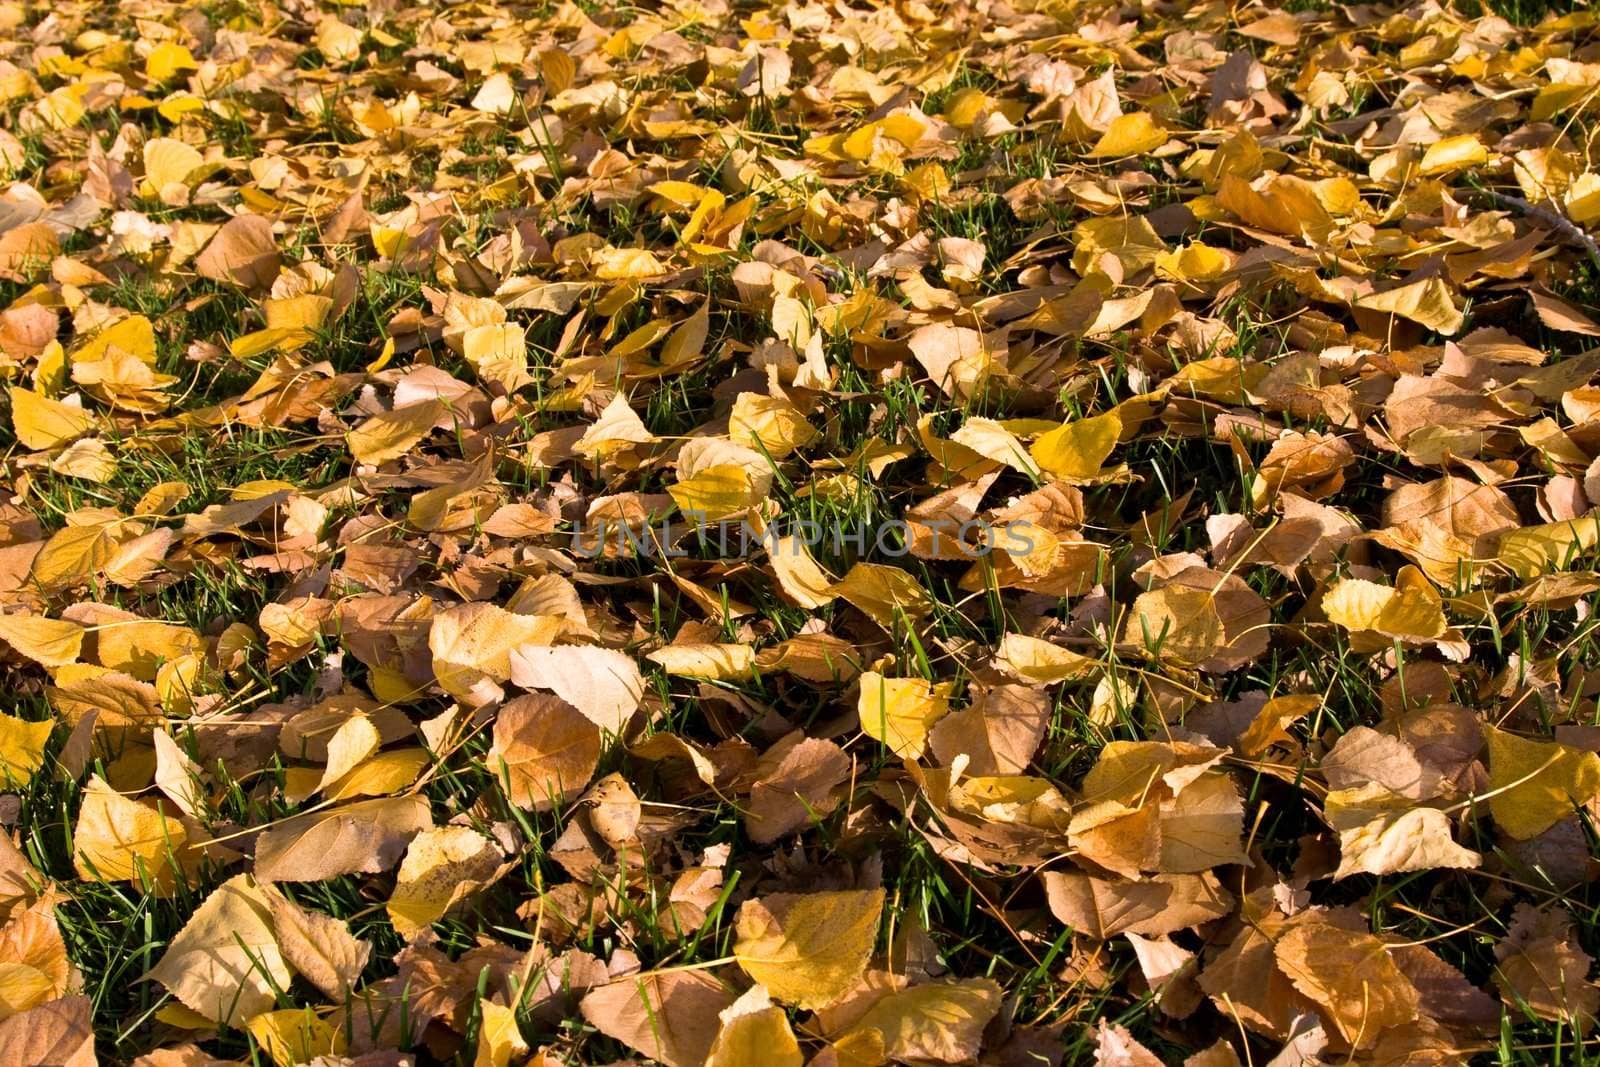 Leaves in autumn laying on grass after falling from tree